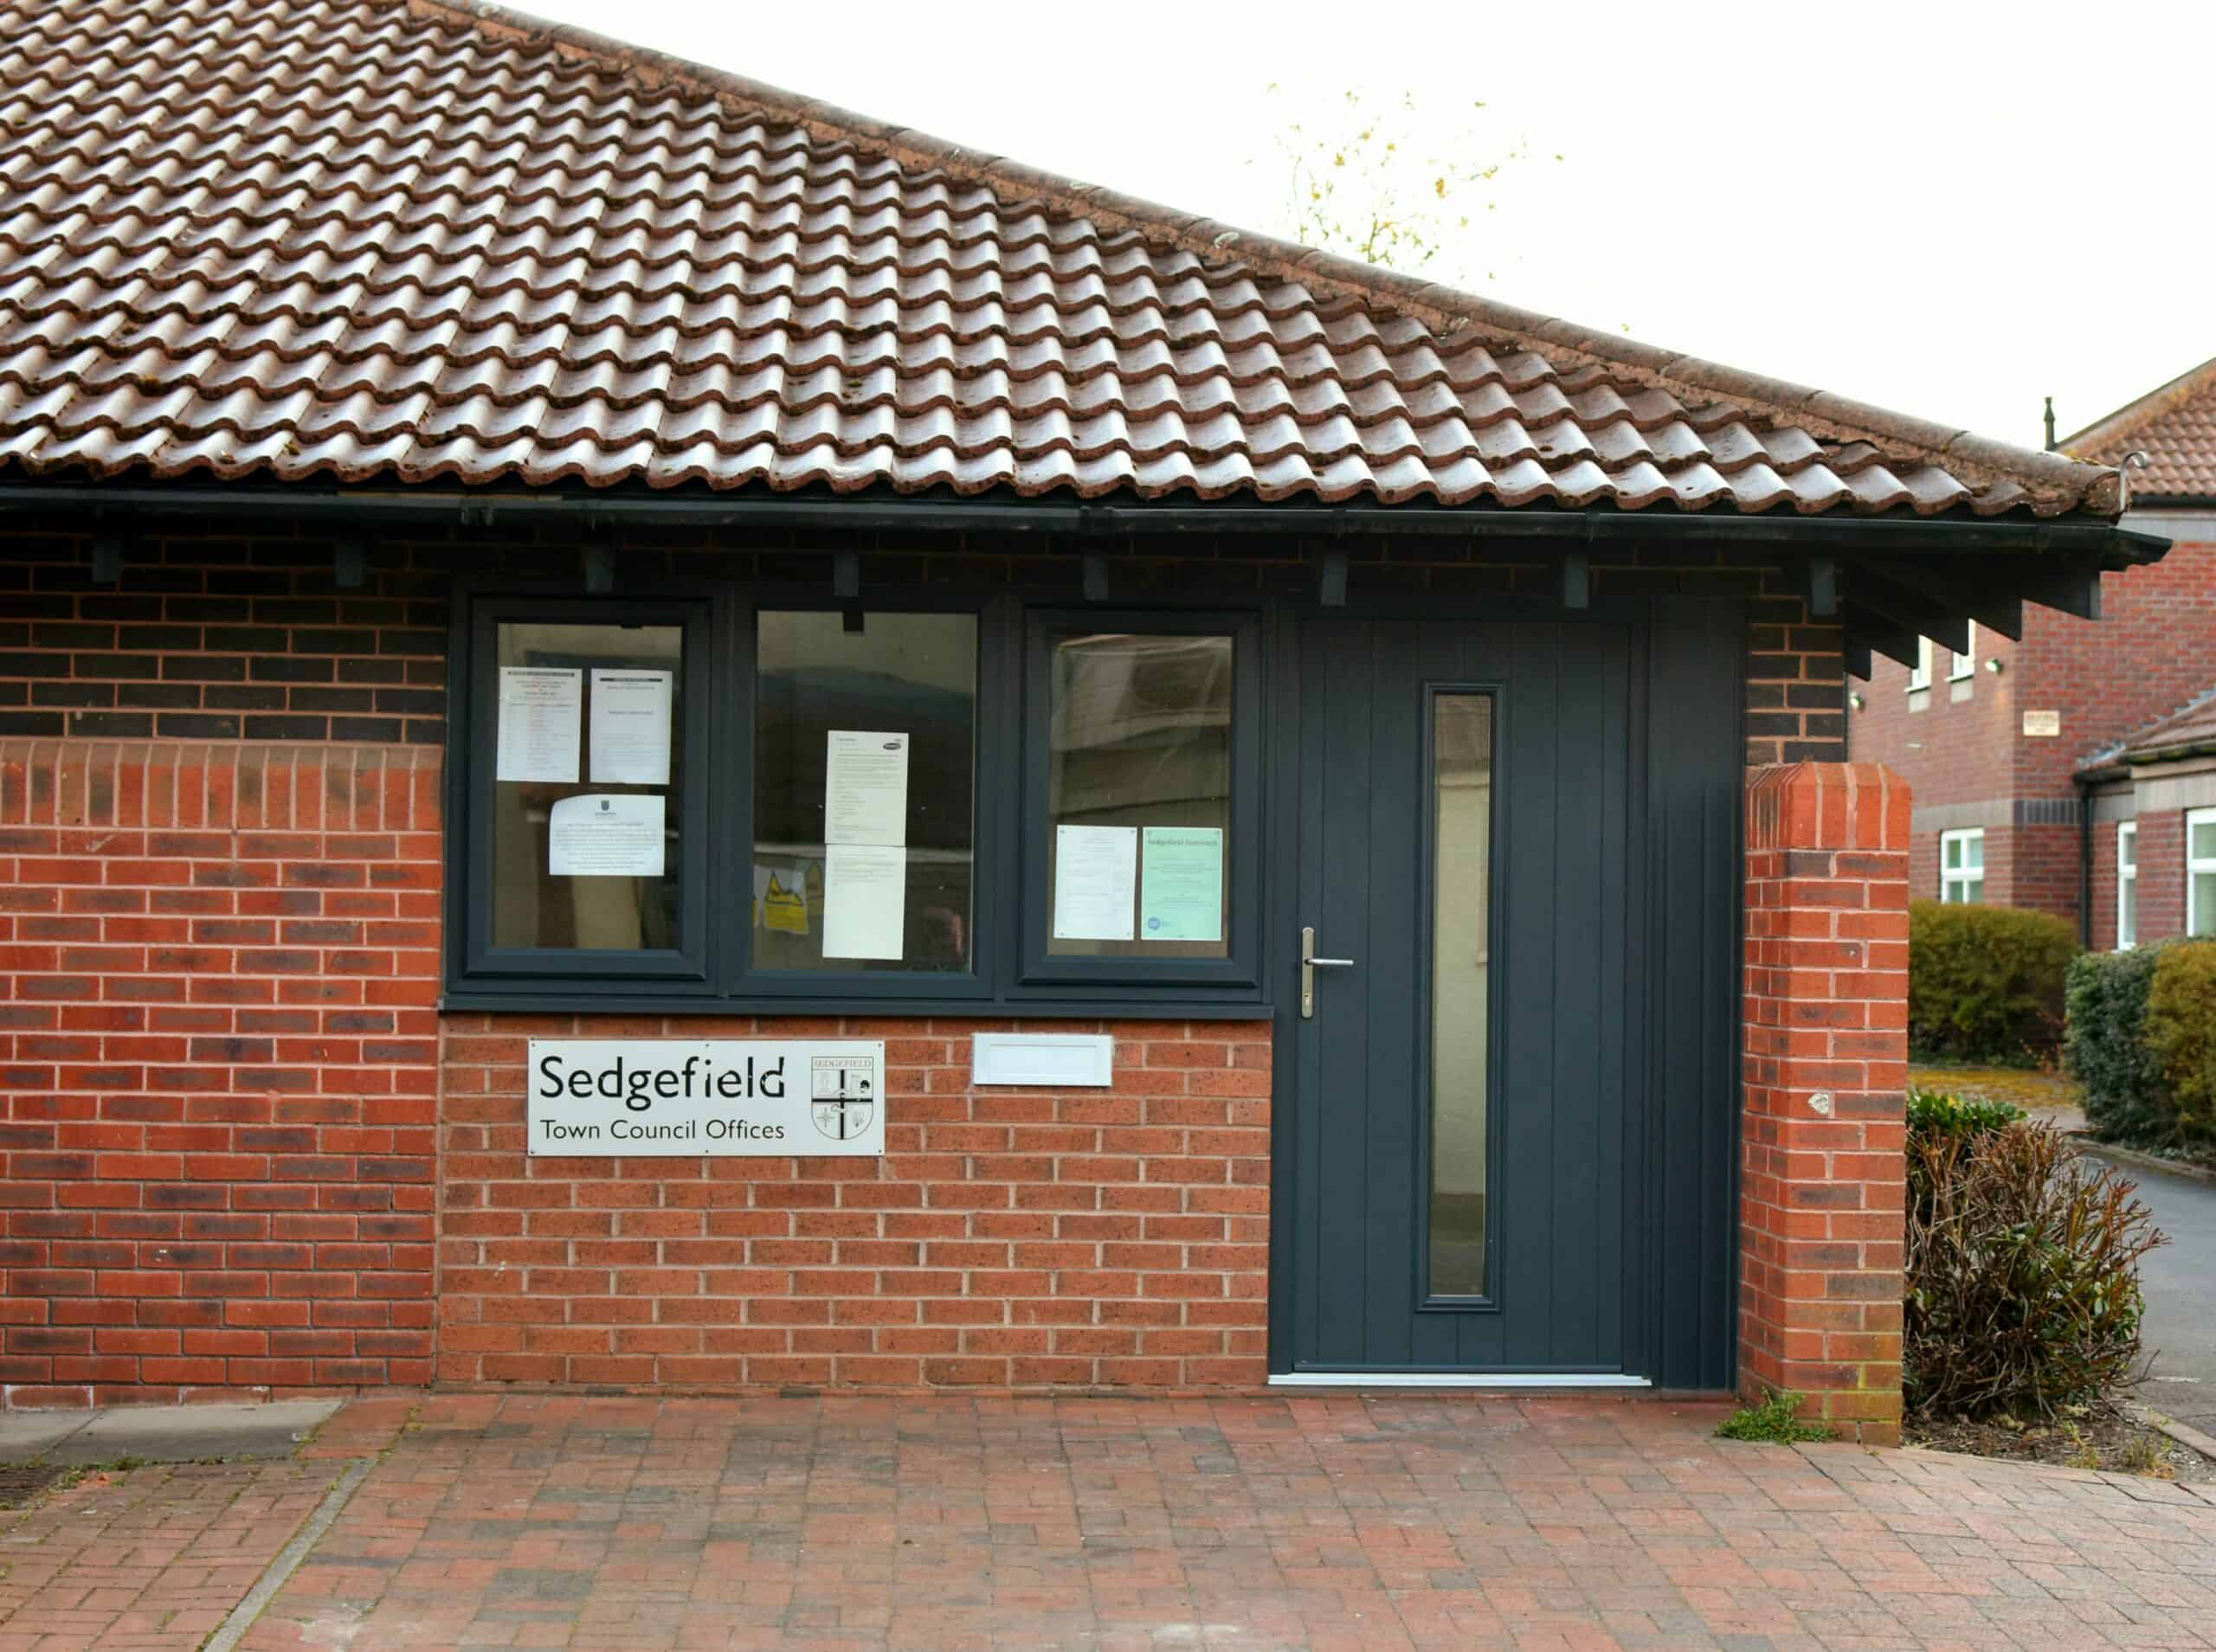 Sedgefield Town Council Office